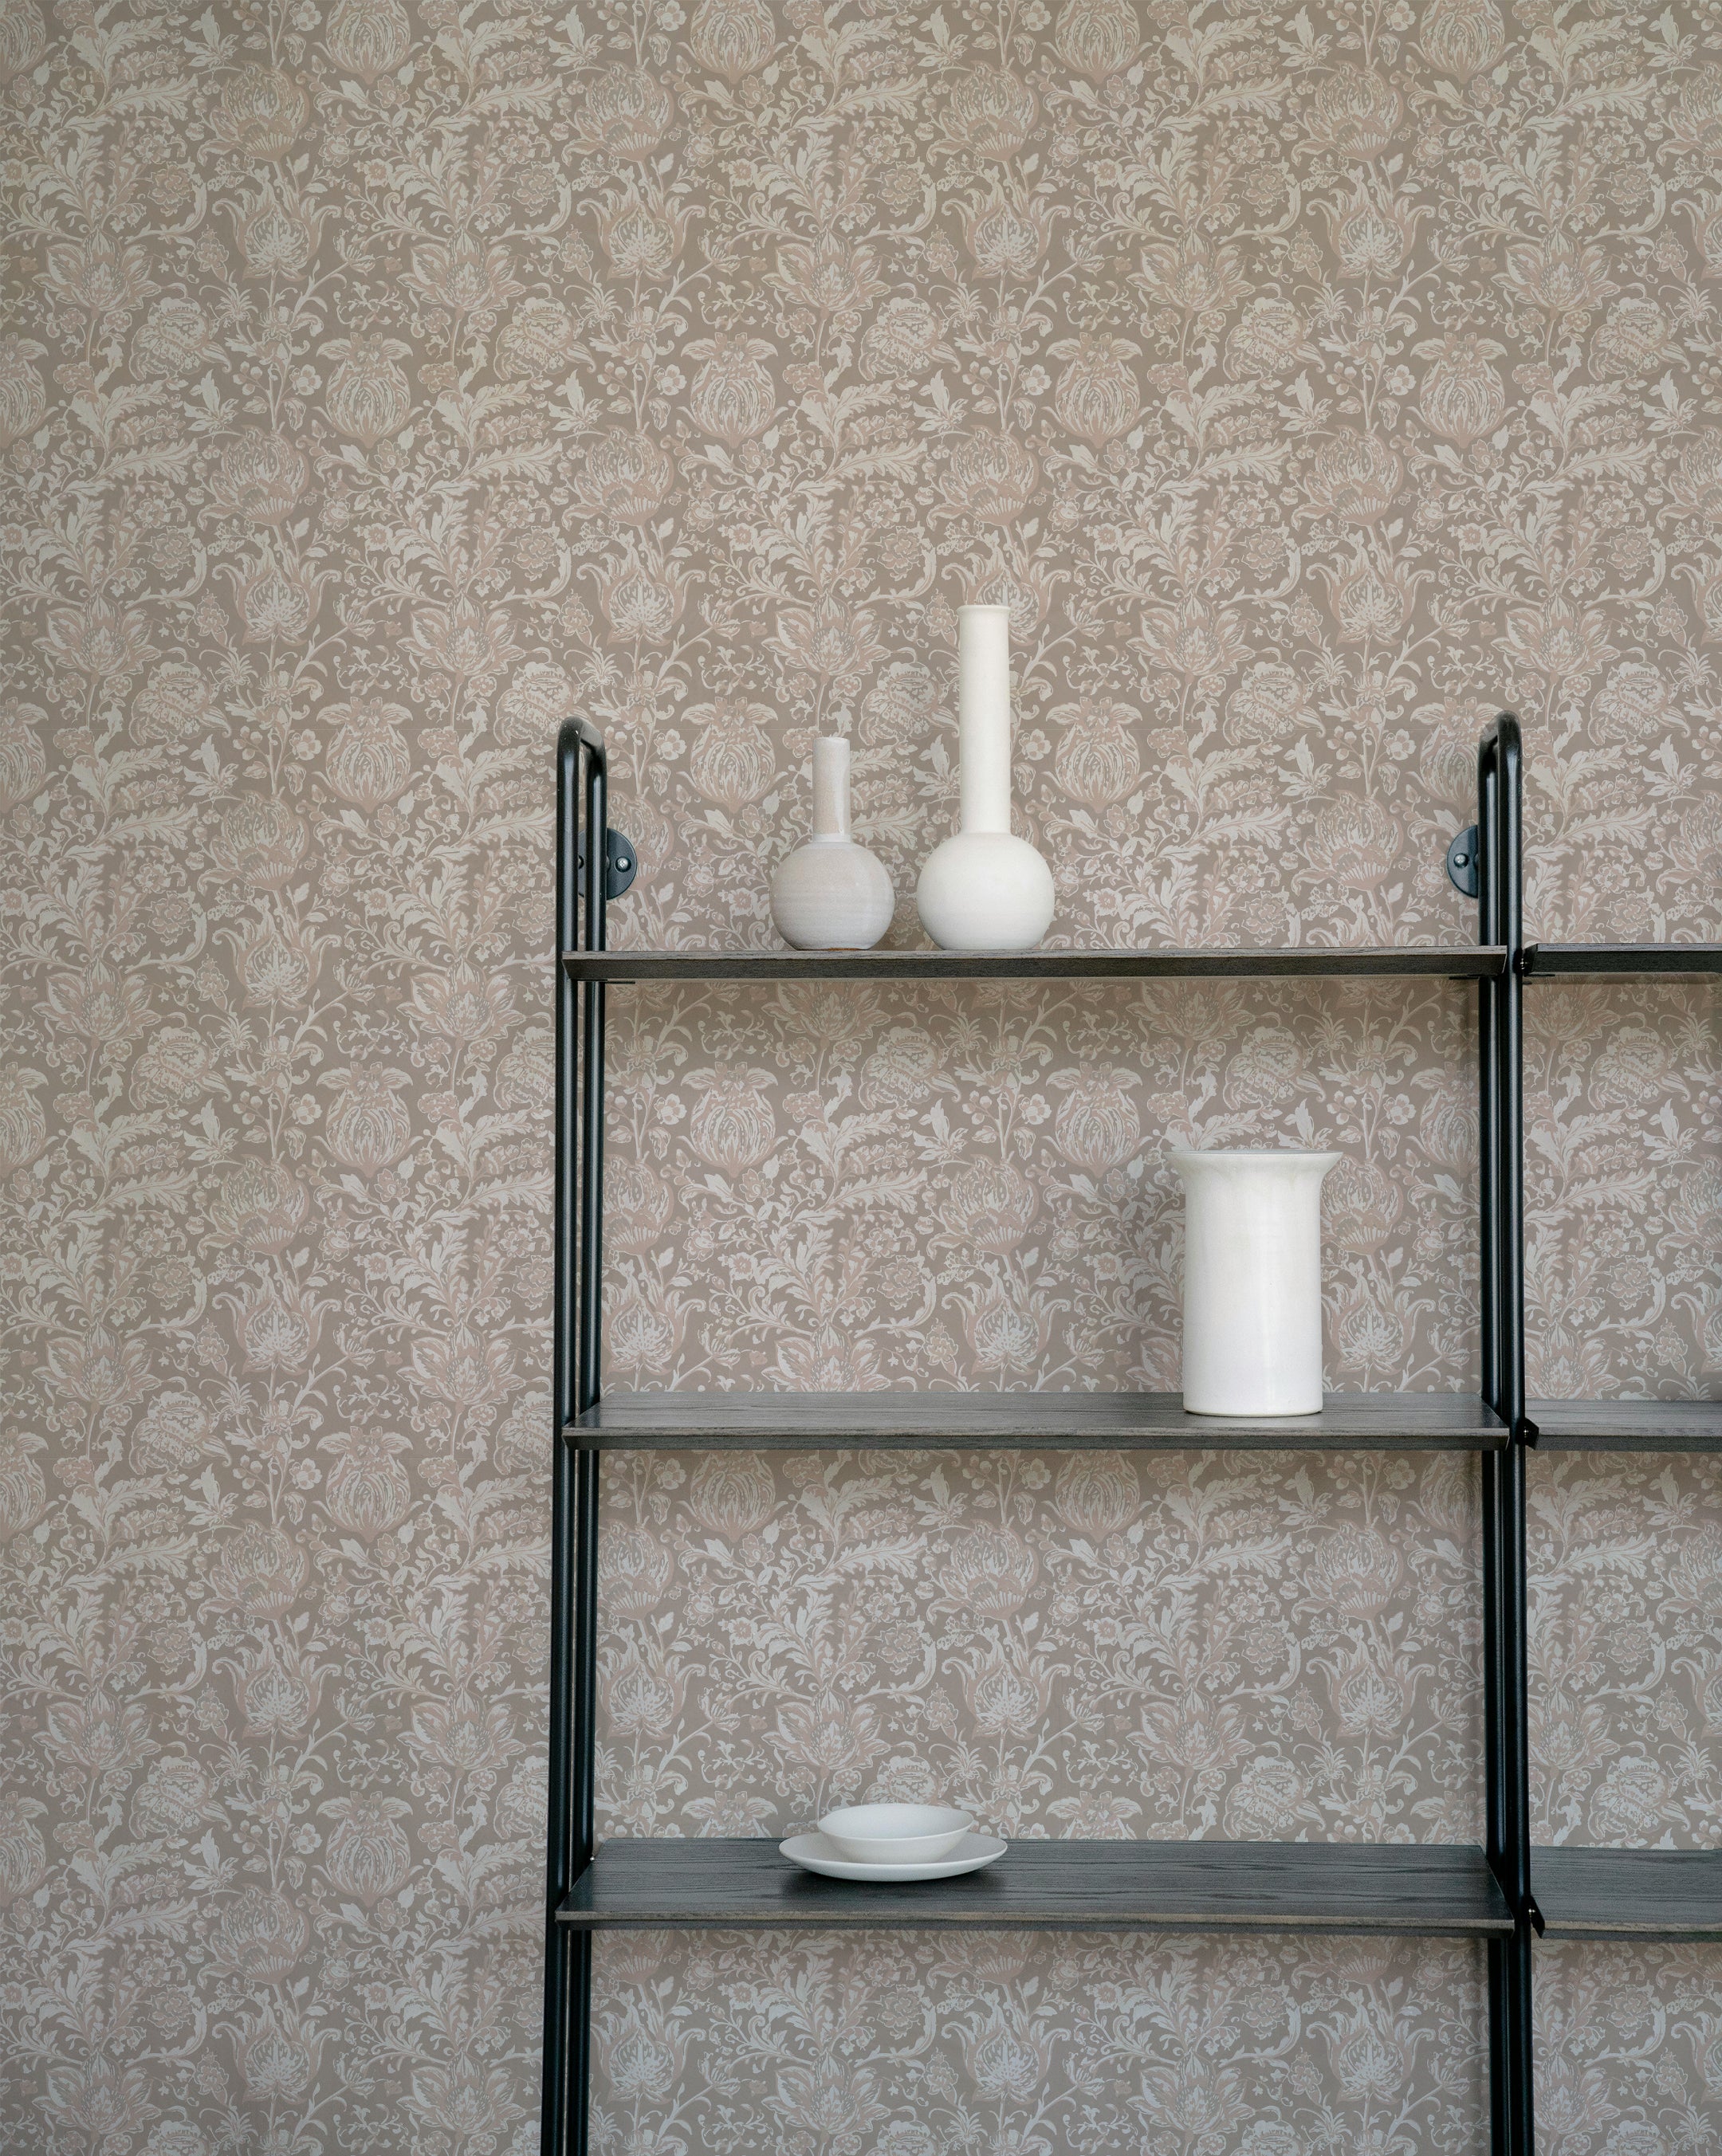 A minimalist shelf displaying white vases and dishes against the Marseilles Wallpaper, which features an elaborate floral pattern in lavender grey. The wallpaper adds a touch of elegance and subtle sophistication to the background.